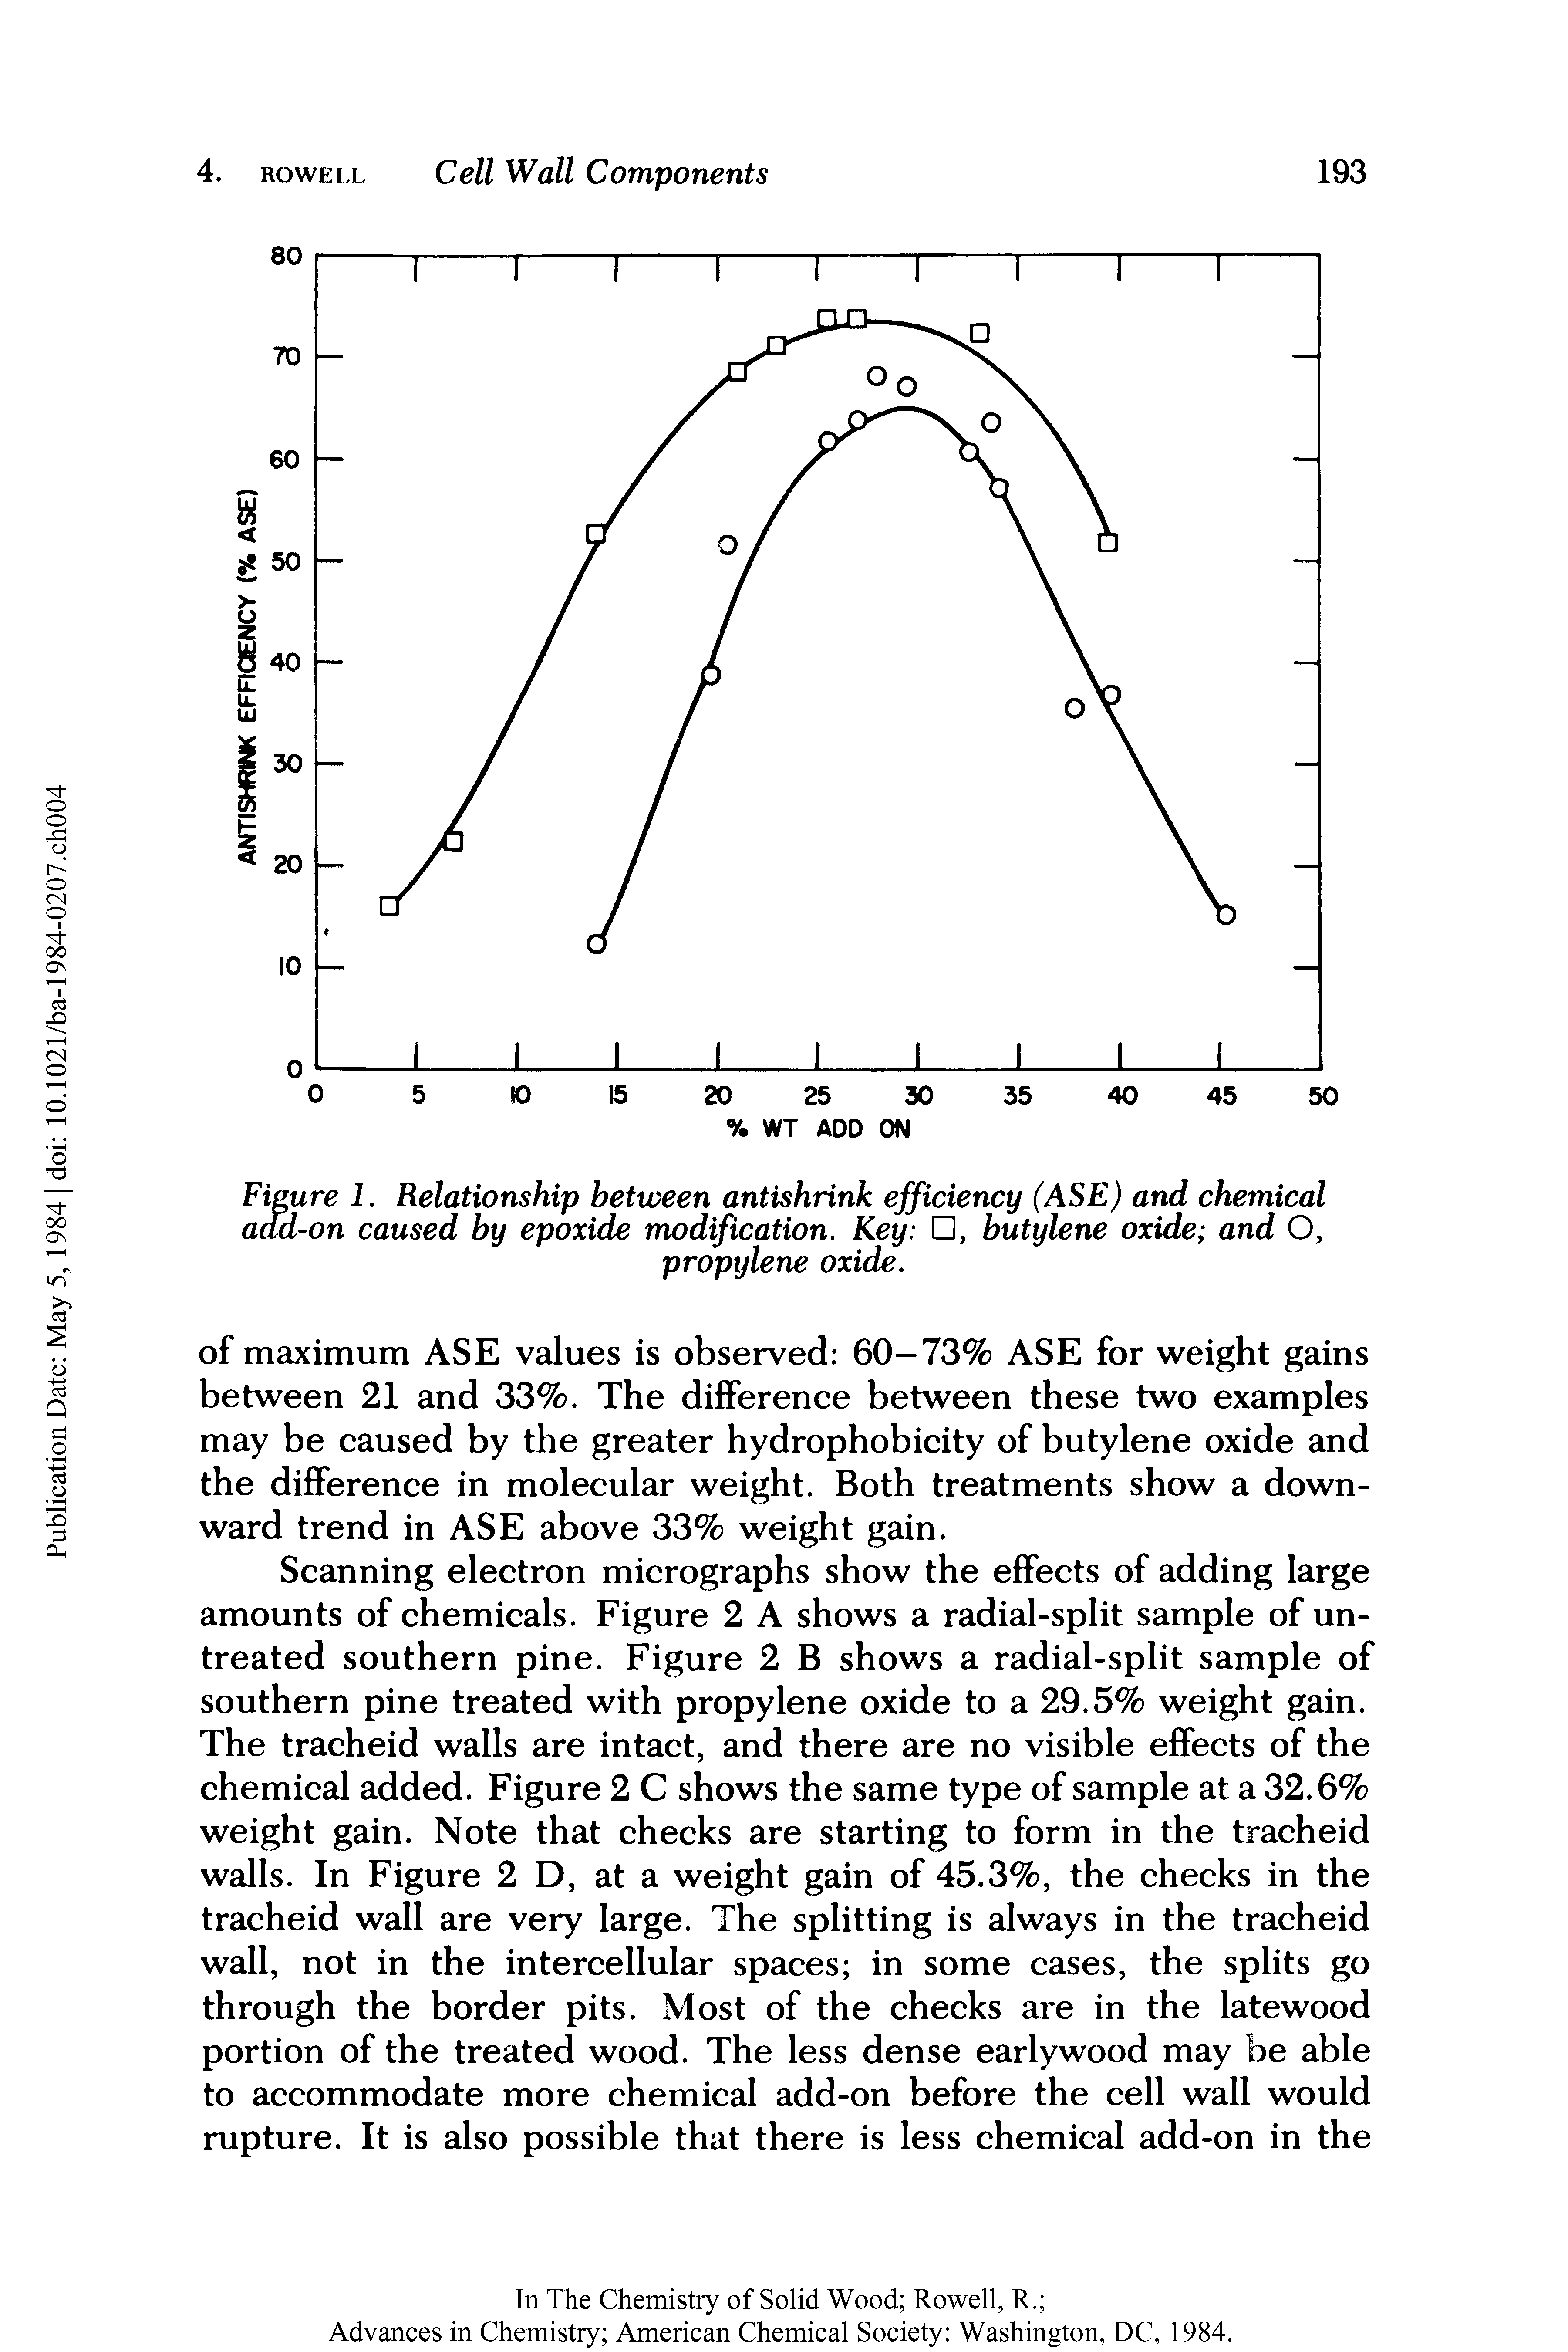 Figure 1. Relationship between antishrink efficiency (ASE) and chemical add-on caused by epoxide modification. Key , butylene oxide and O,...